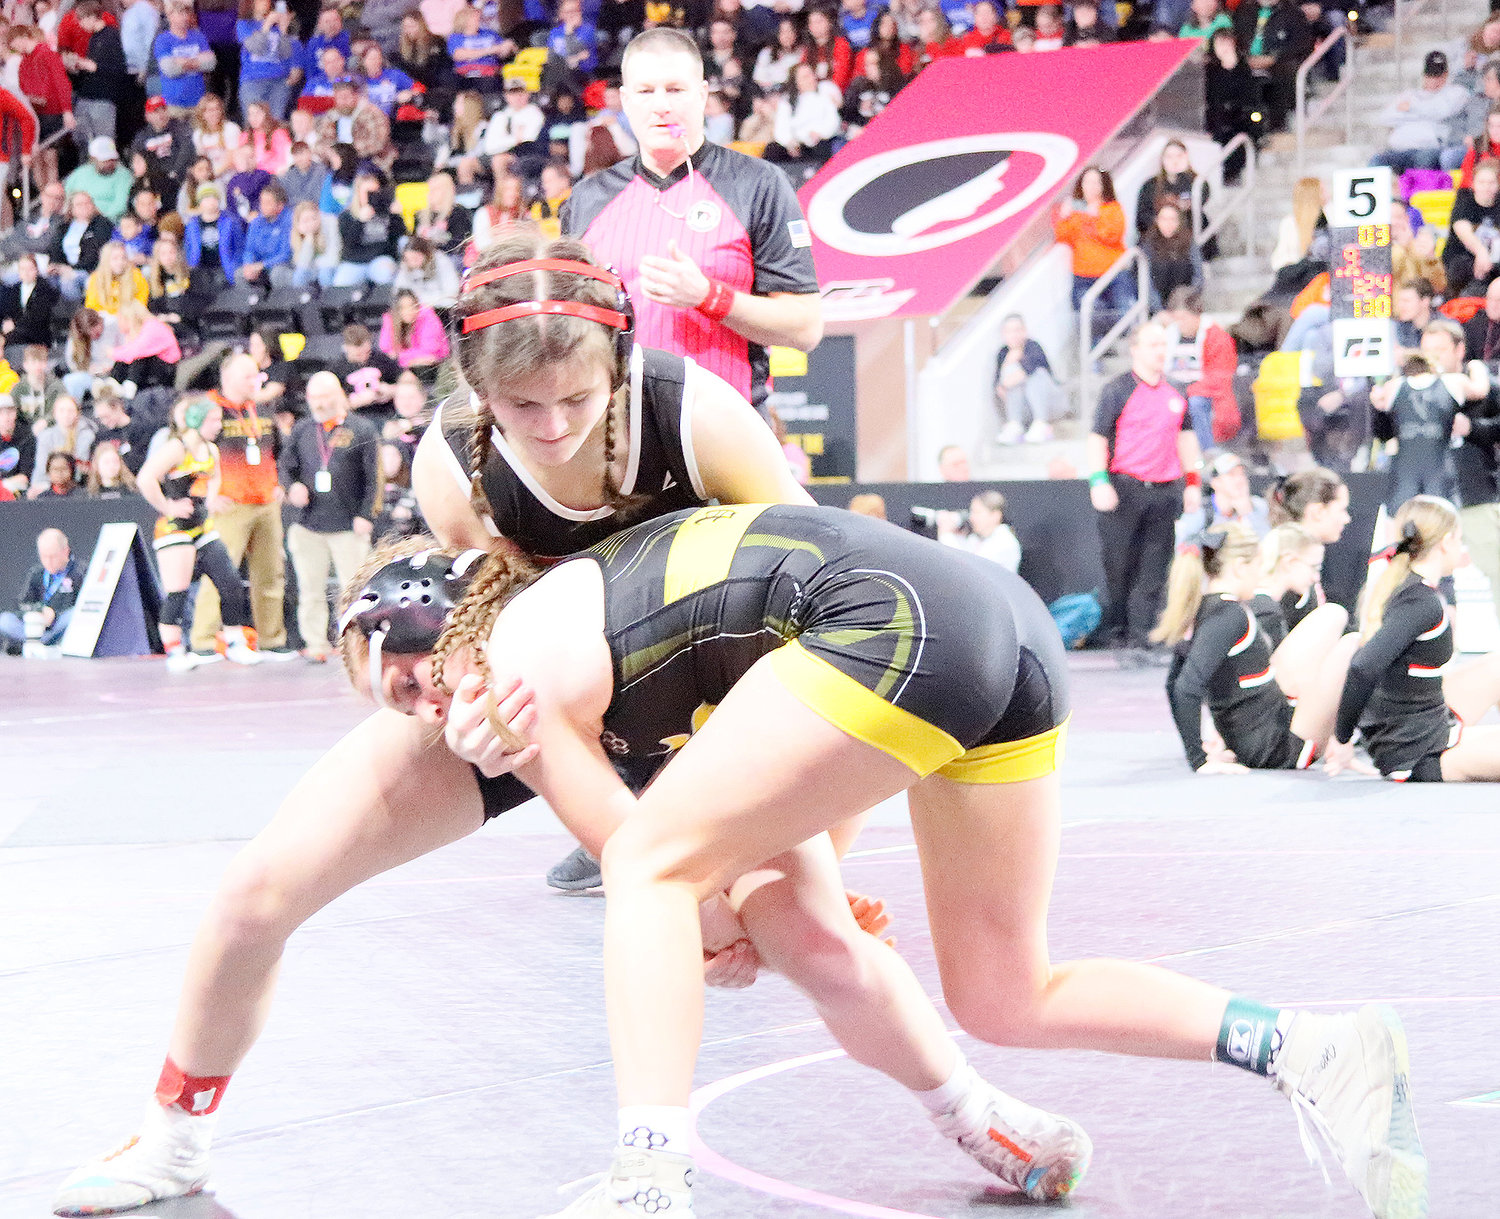 Freshman Mara Smith gets a brief advantage over No. 2 seed Chloe Sanders of Vinton-Shellsburg. Sanders would score a pinfall over Smith. Smith would go 1-2 in the IGHSAU's first-ever state wrestling tournament.